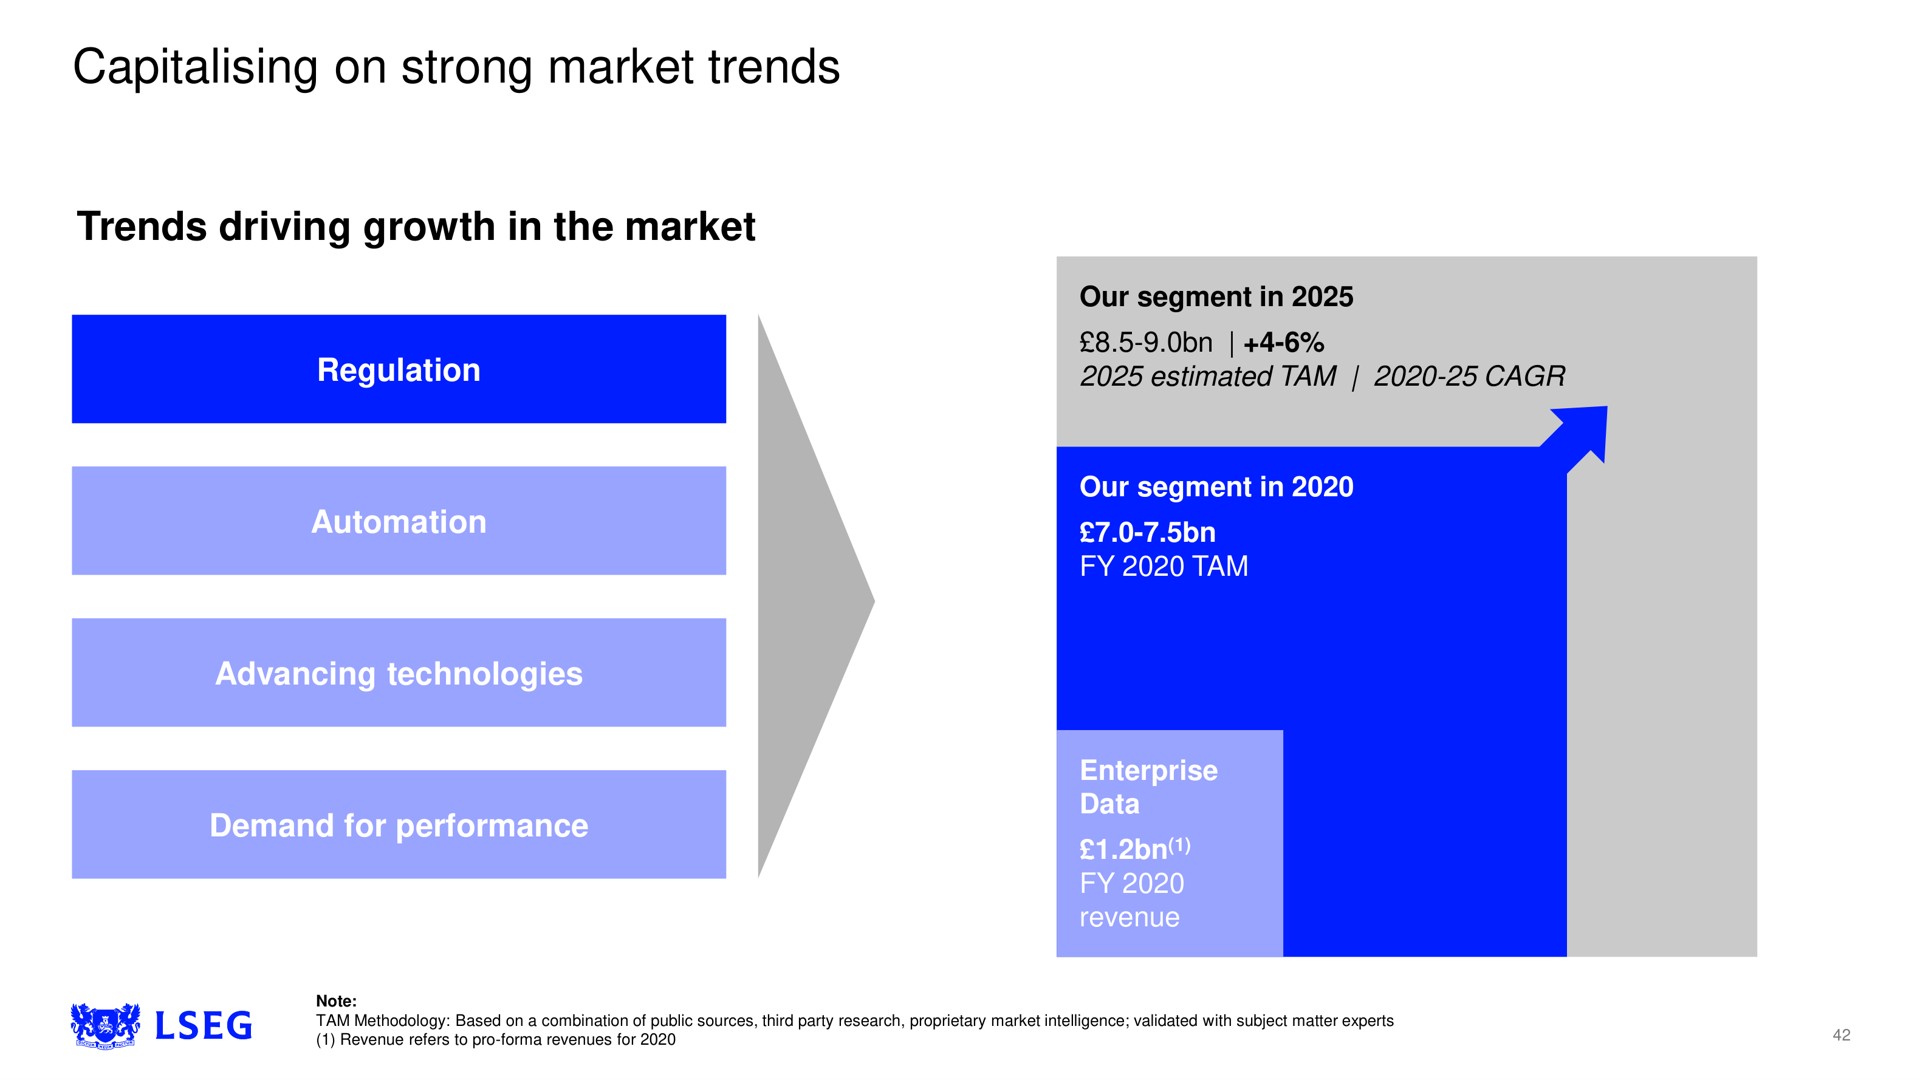 on strong market trends | LSE